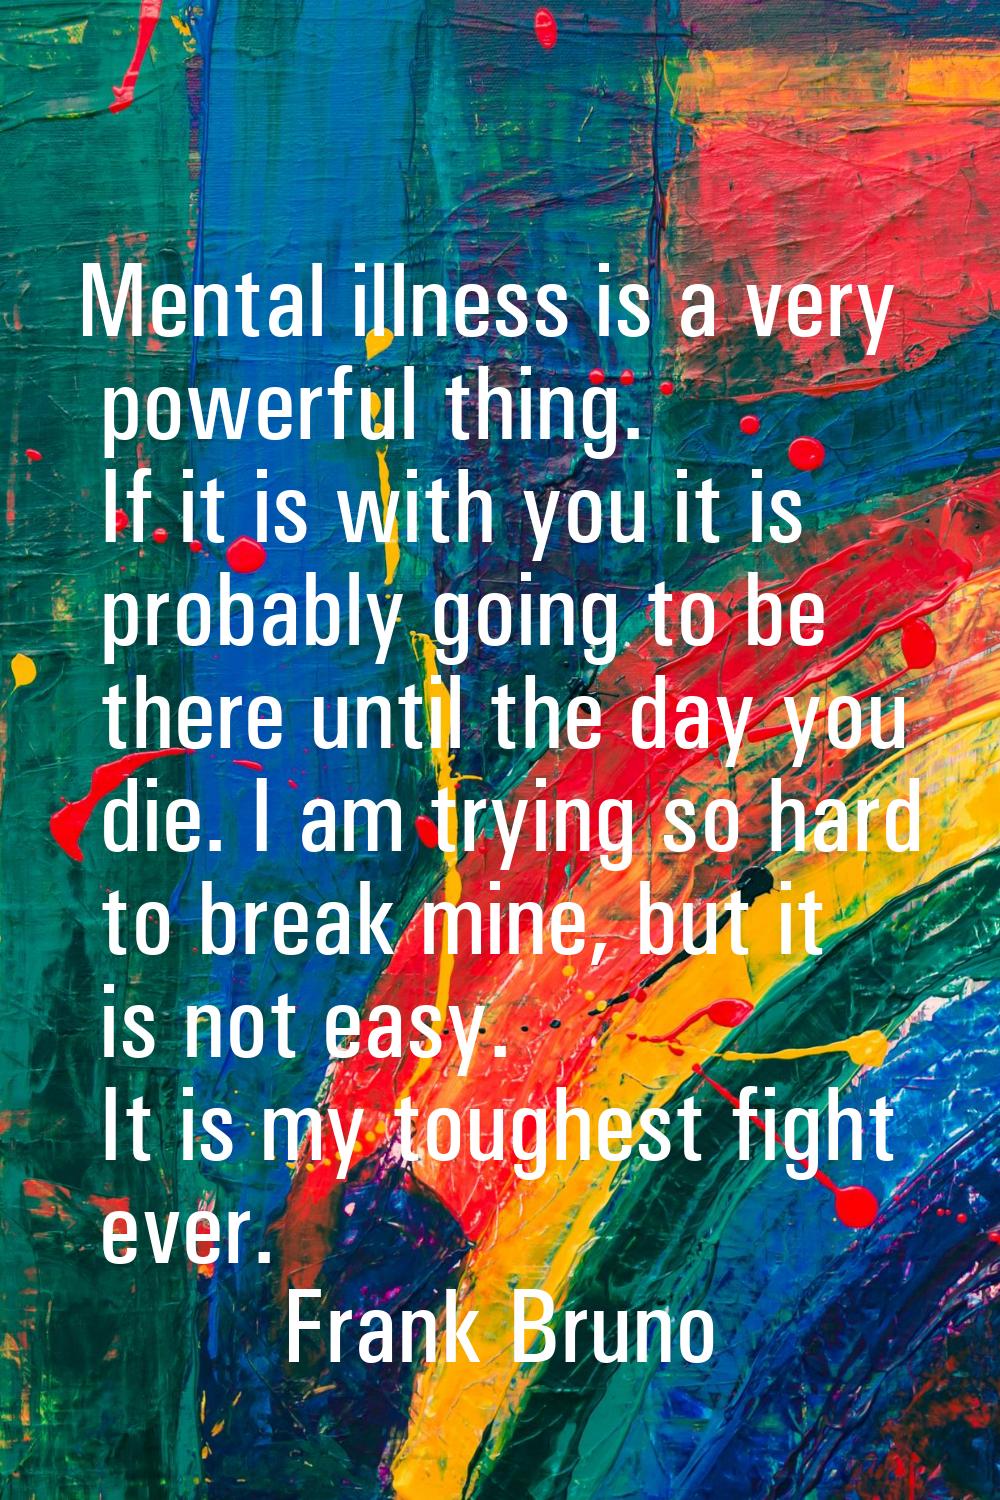 Mental illness is a very powerful thing. If it is with you it is probably going to be there until t